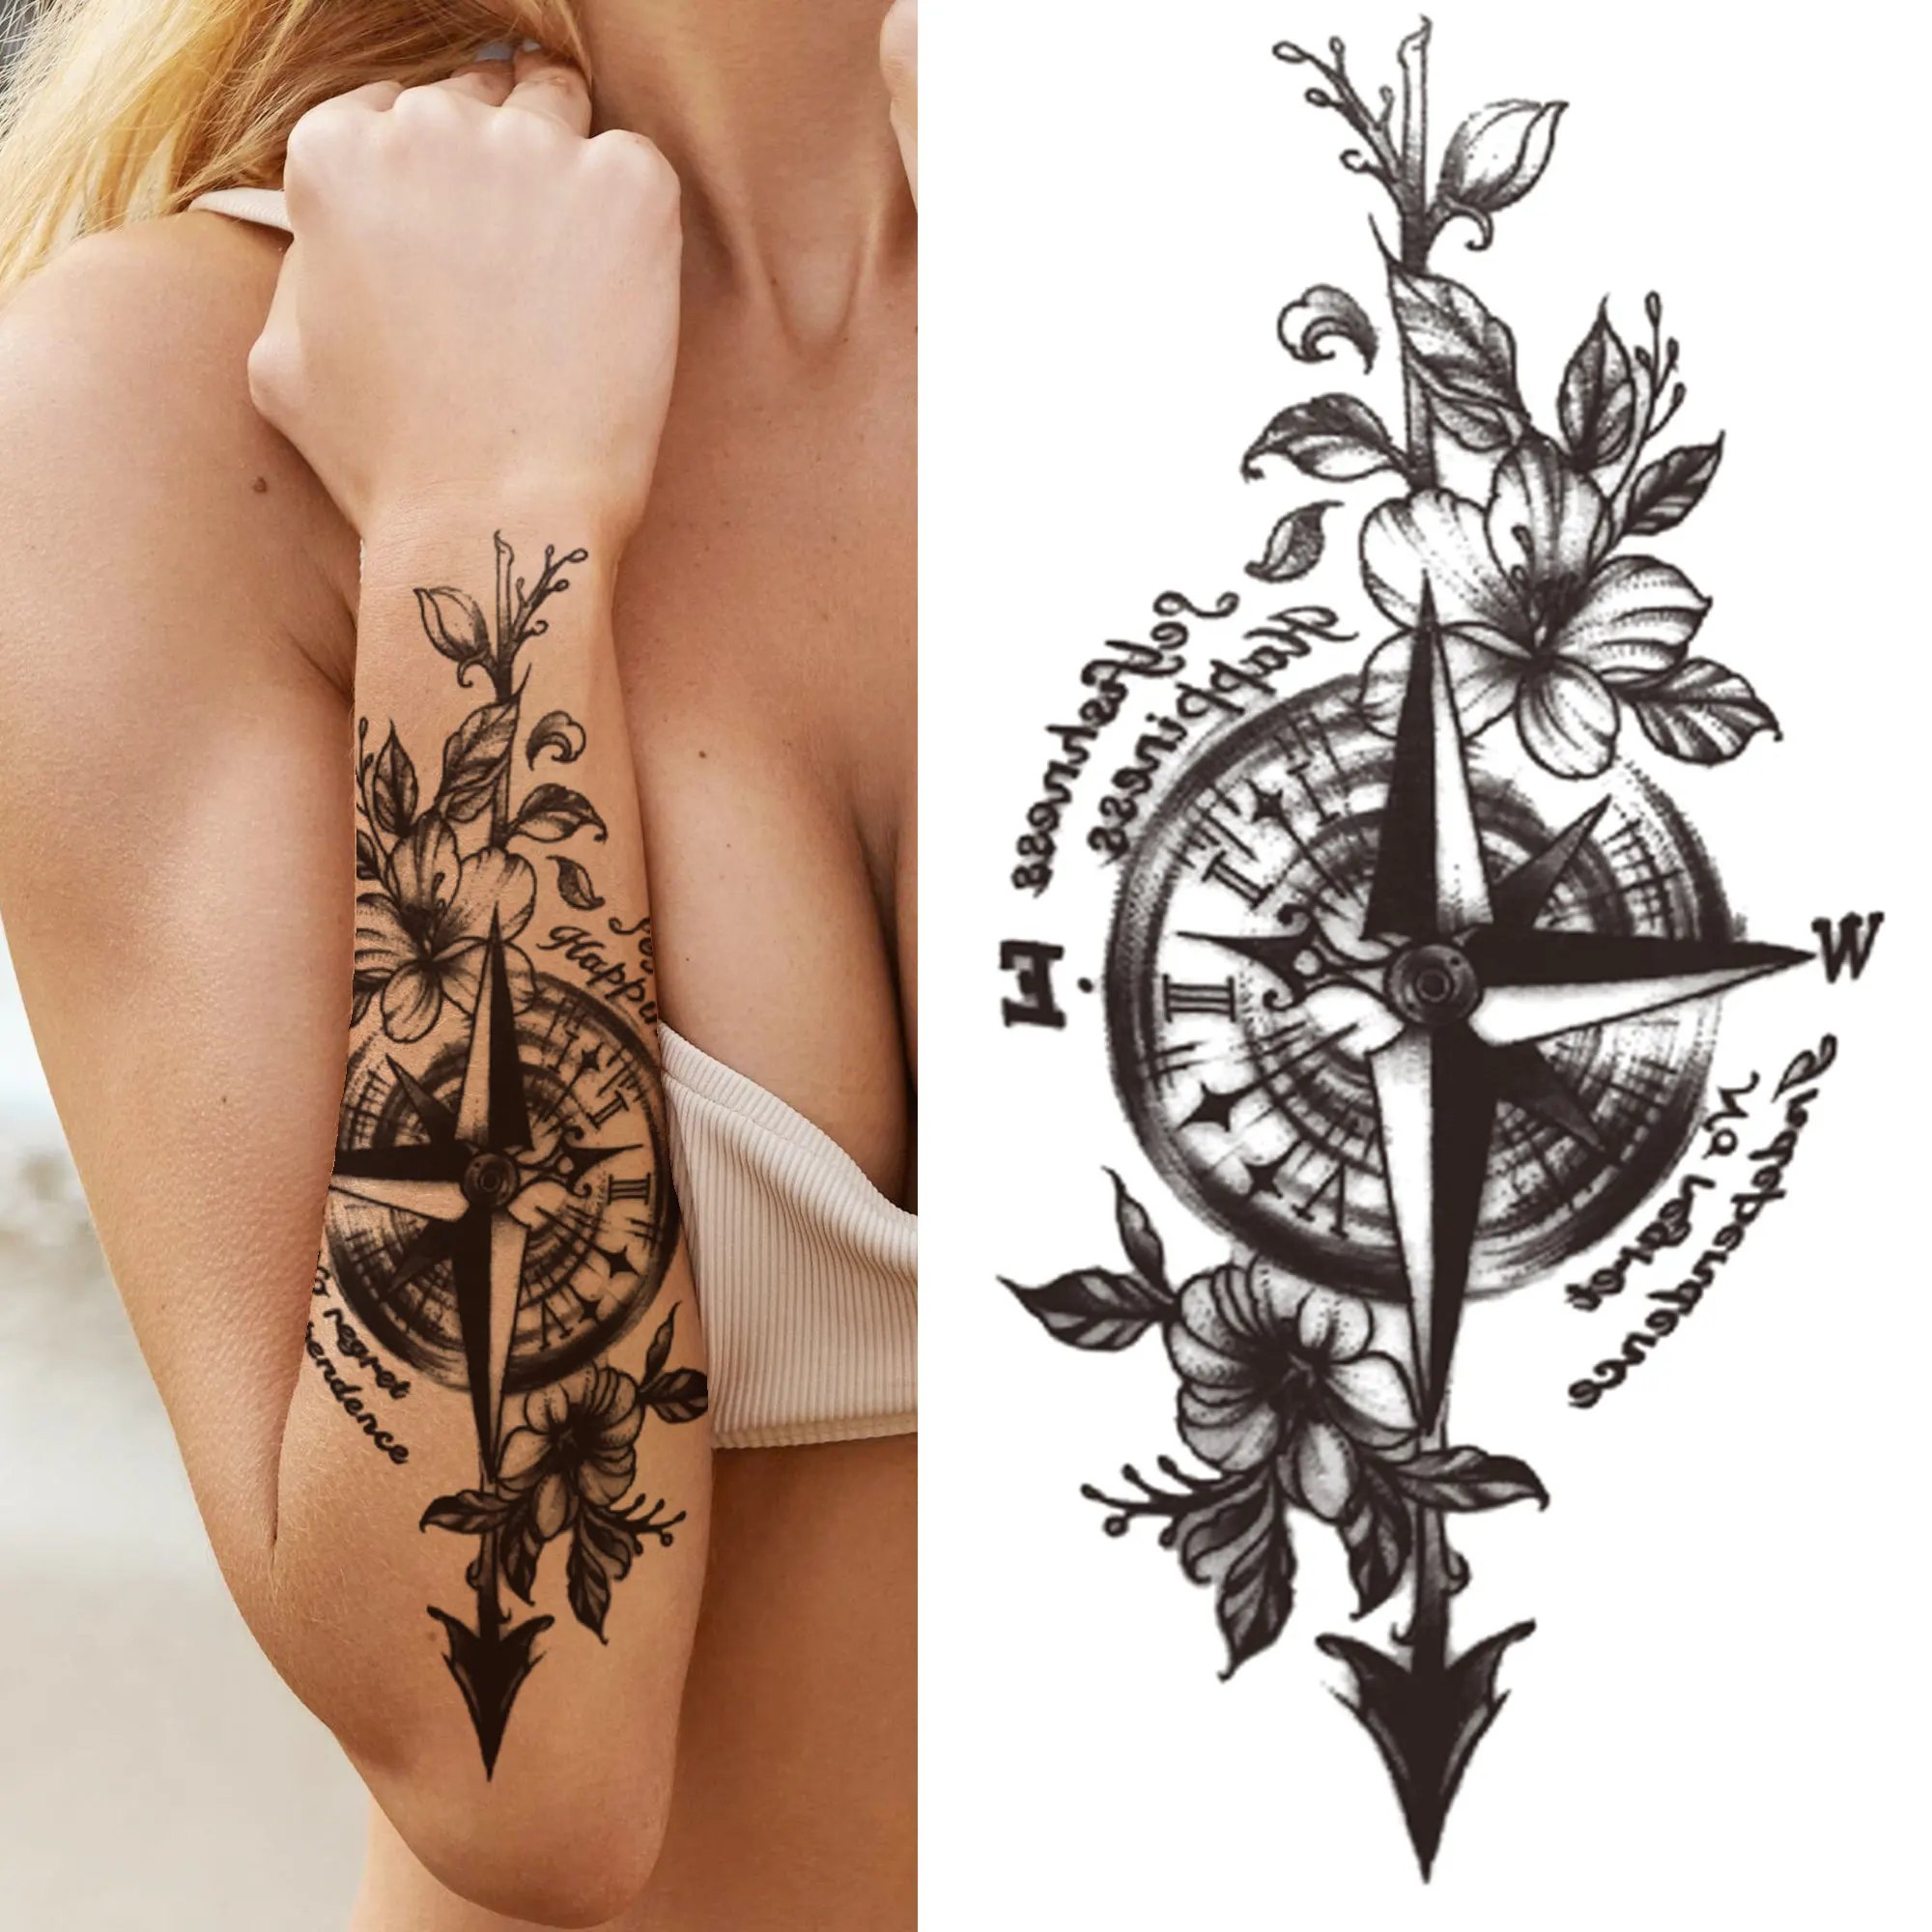 Navigating Lifes Journey: The Symbolism of Compass Forearm Tattoos